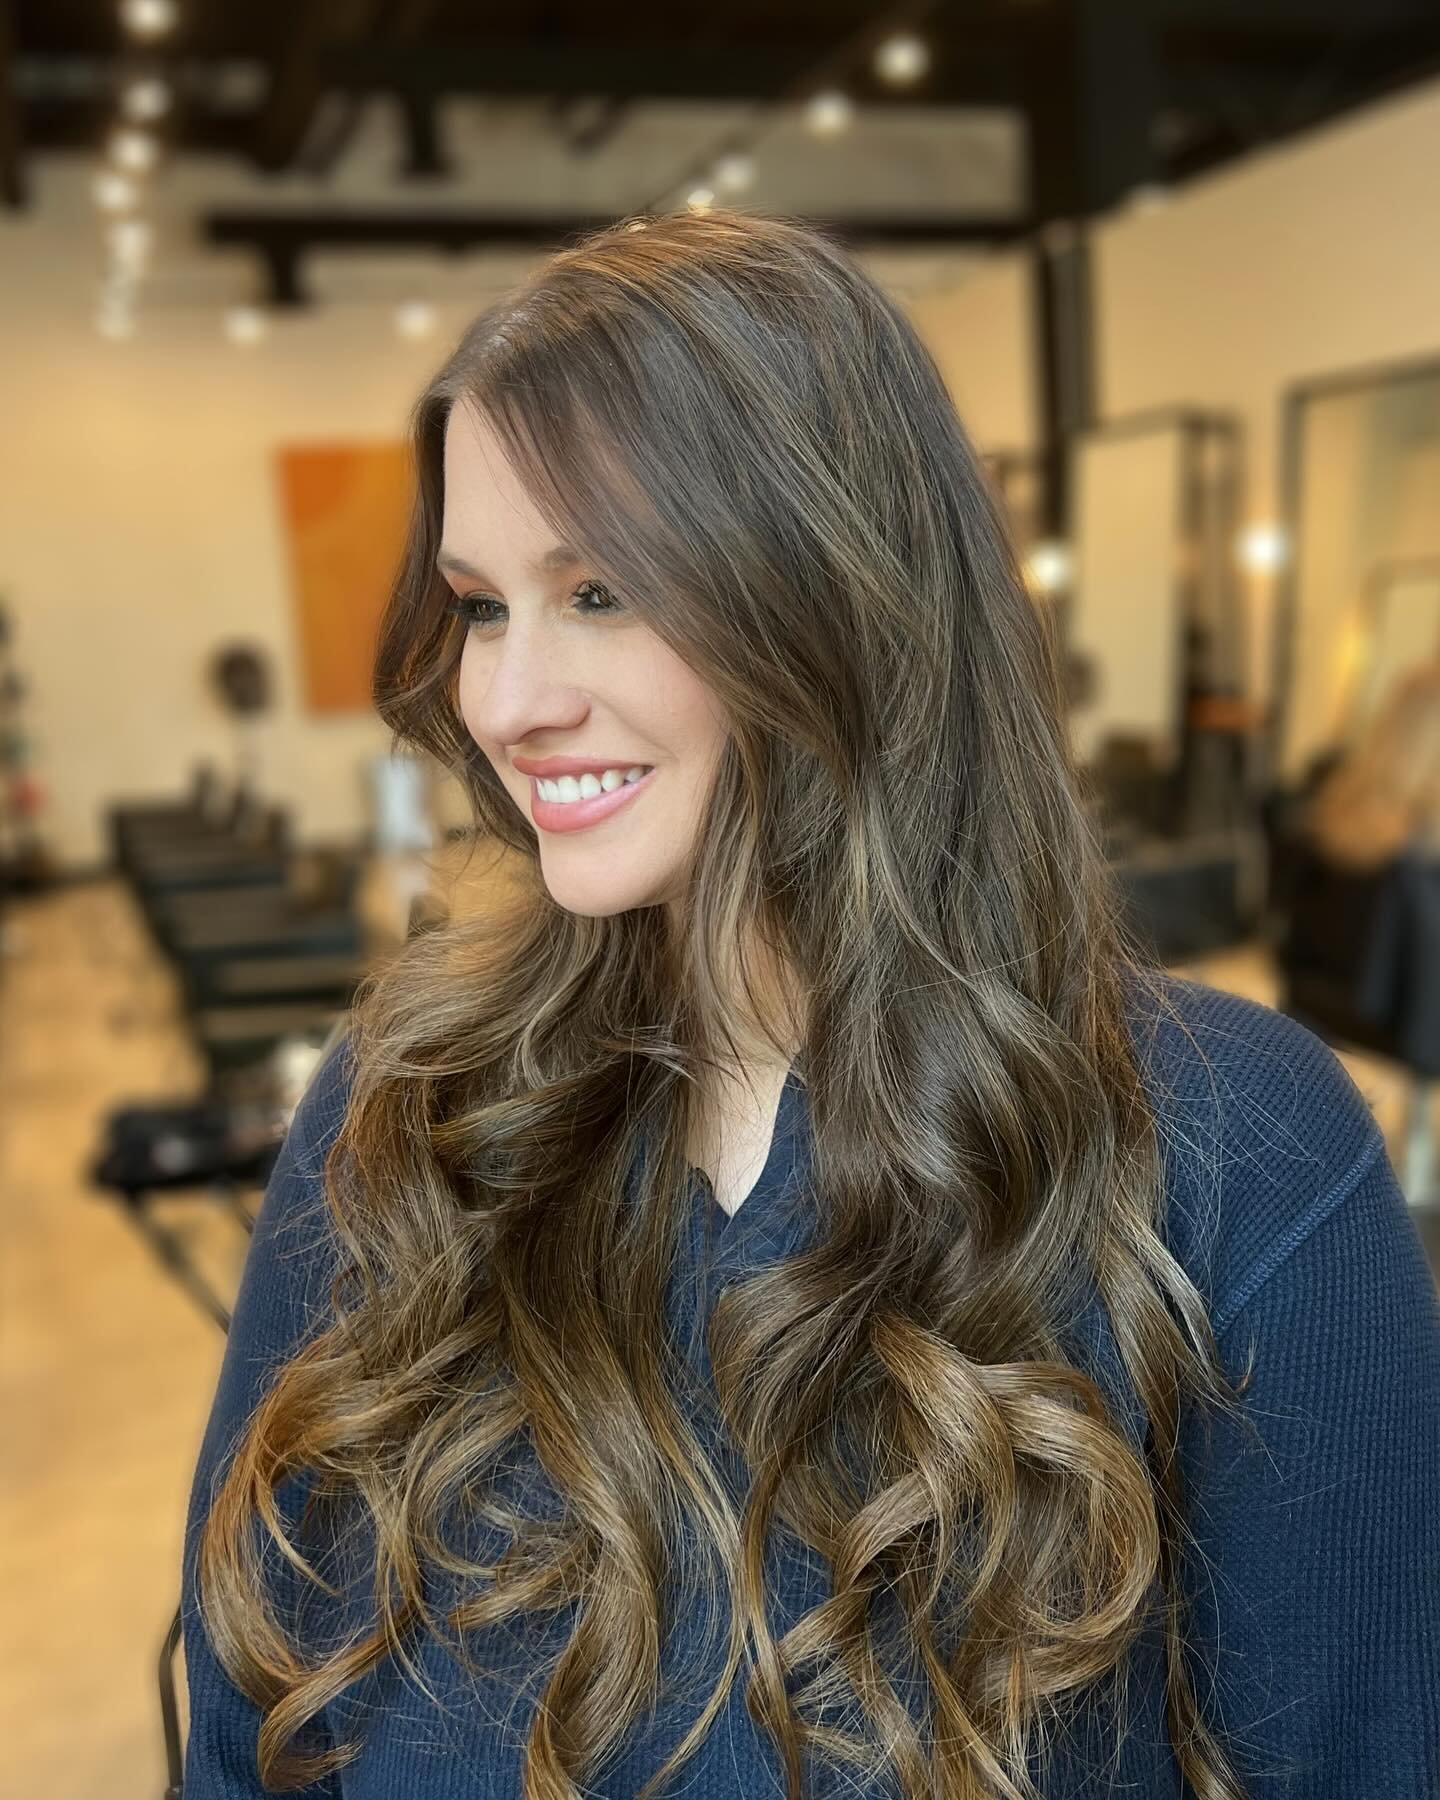 4 reasons why you shouldn&rsquo;t underestimate tape-in extensions: 

* The panels are lightweight, thin and cover a larger area giving maximum volume.

* Tape-in hair extensions have one of the fastest application time. 

* When applied and removed 